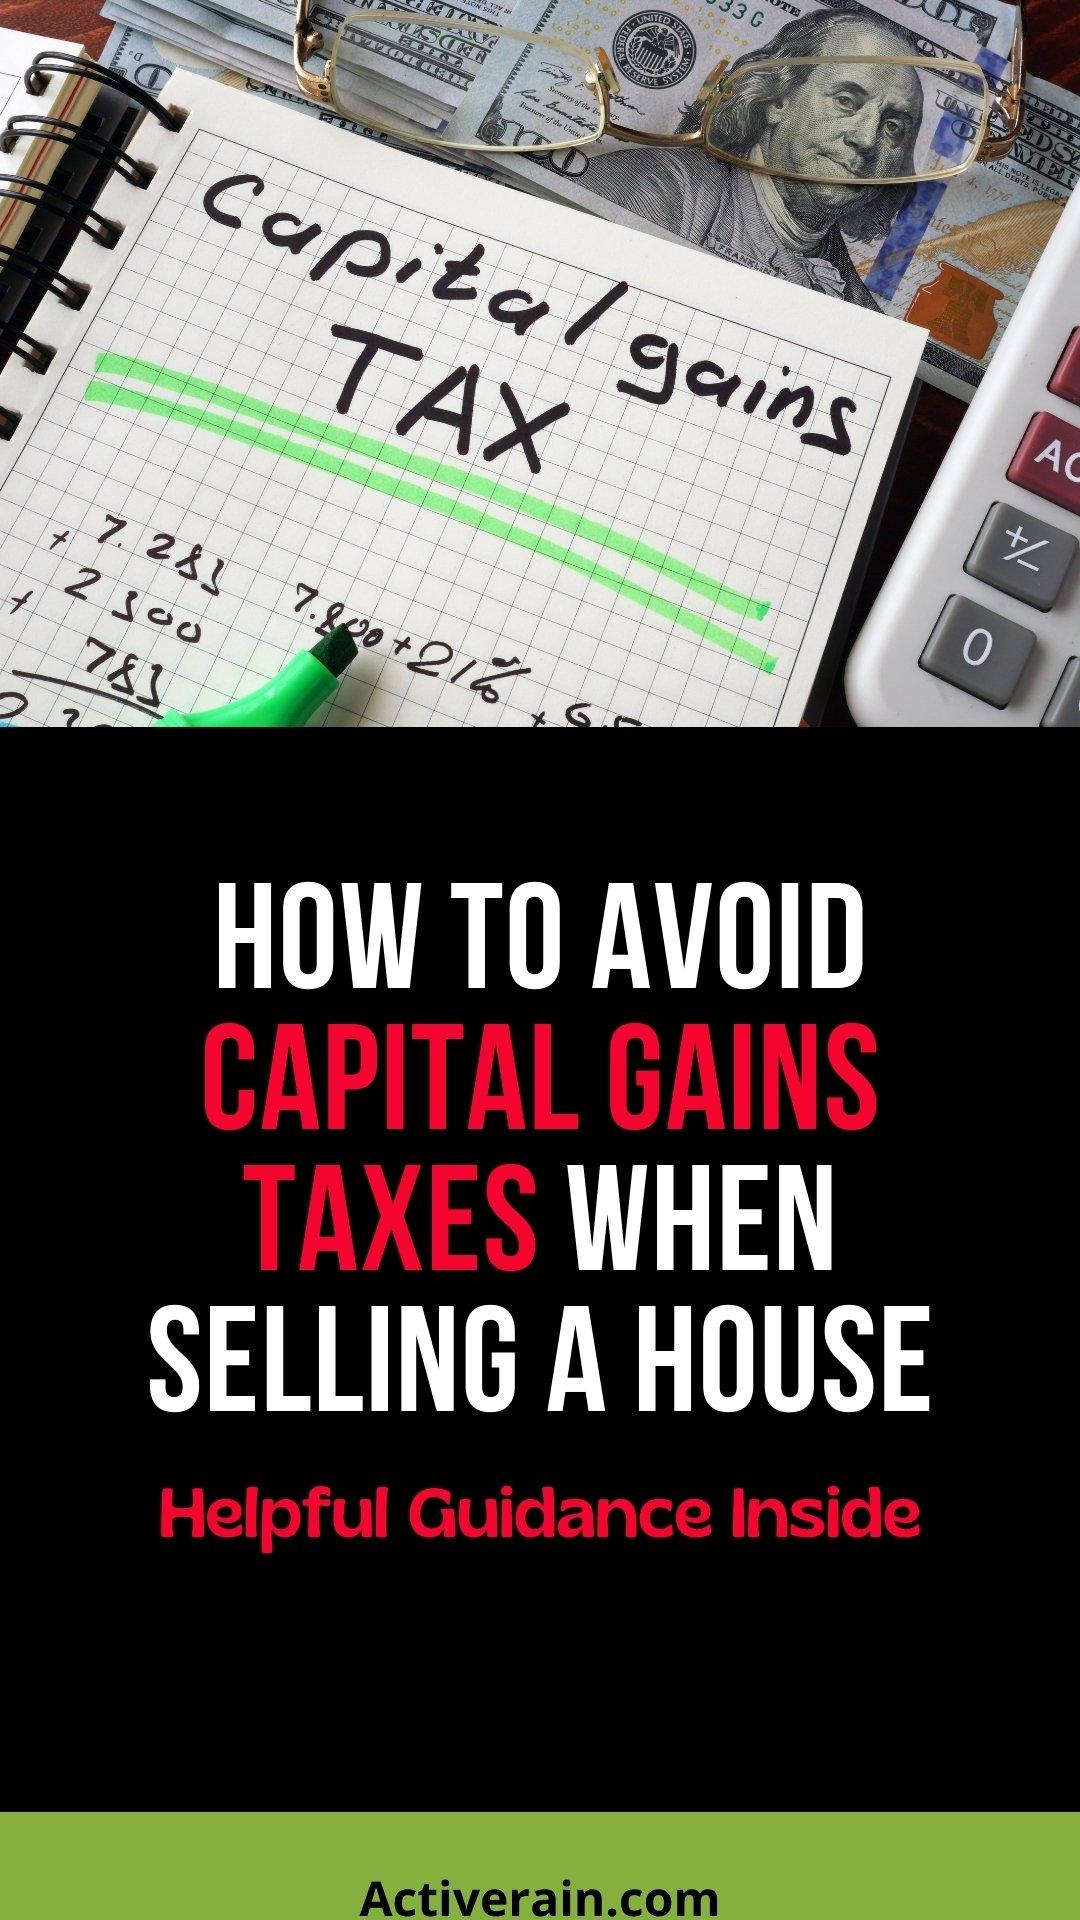 How to avoid capital gains on real estate sales